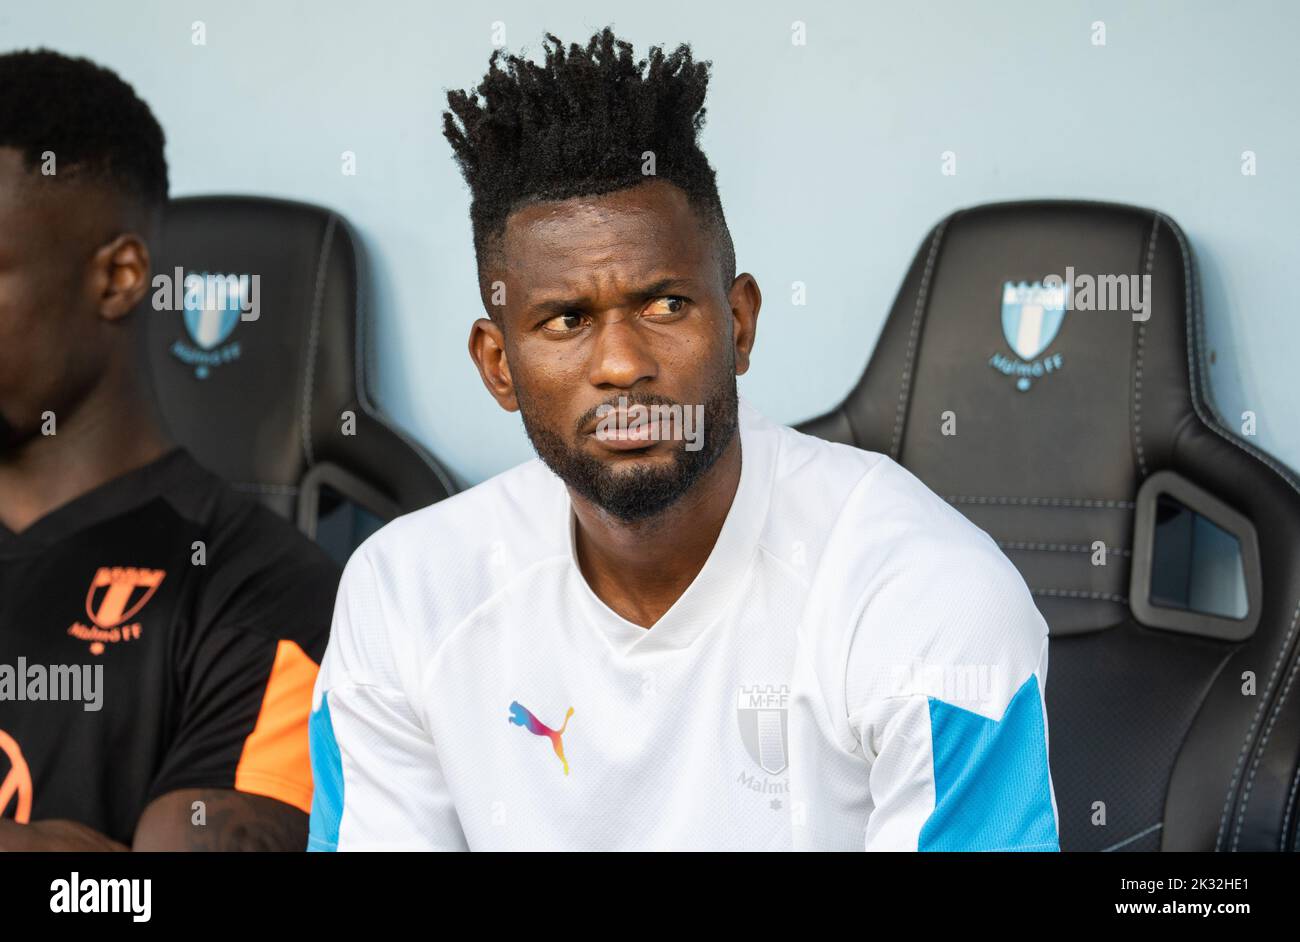 Malmoe, Sweden. 18th, August 2022. Emmanuel Lomotey of Malmö FF seen on the bendch before the UEFA Europa League qualification match between Malmö FF and Sivasspor at Eleda Stadion in Malmö. (Photo credit: Gonzales Photo - Joe Miller). Stock Photo